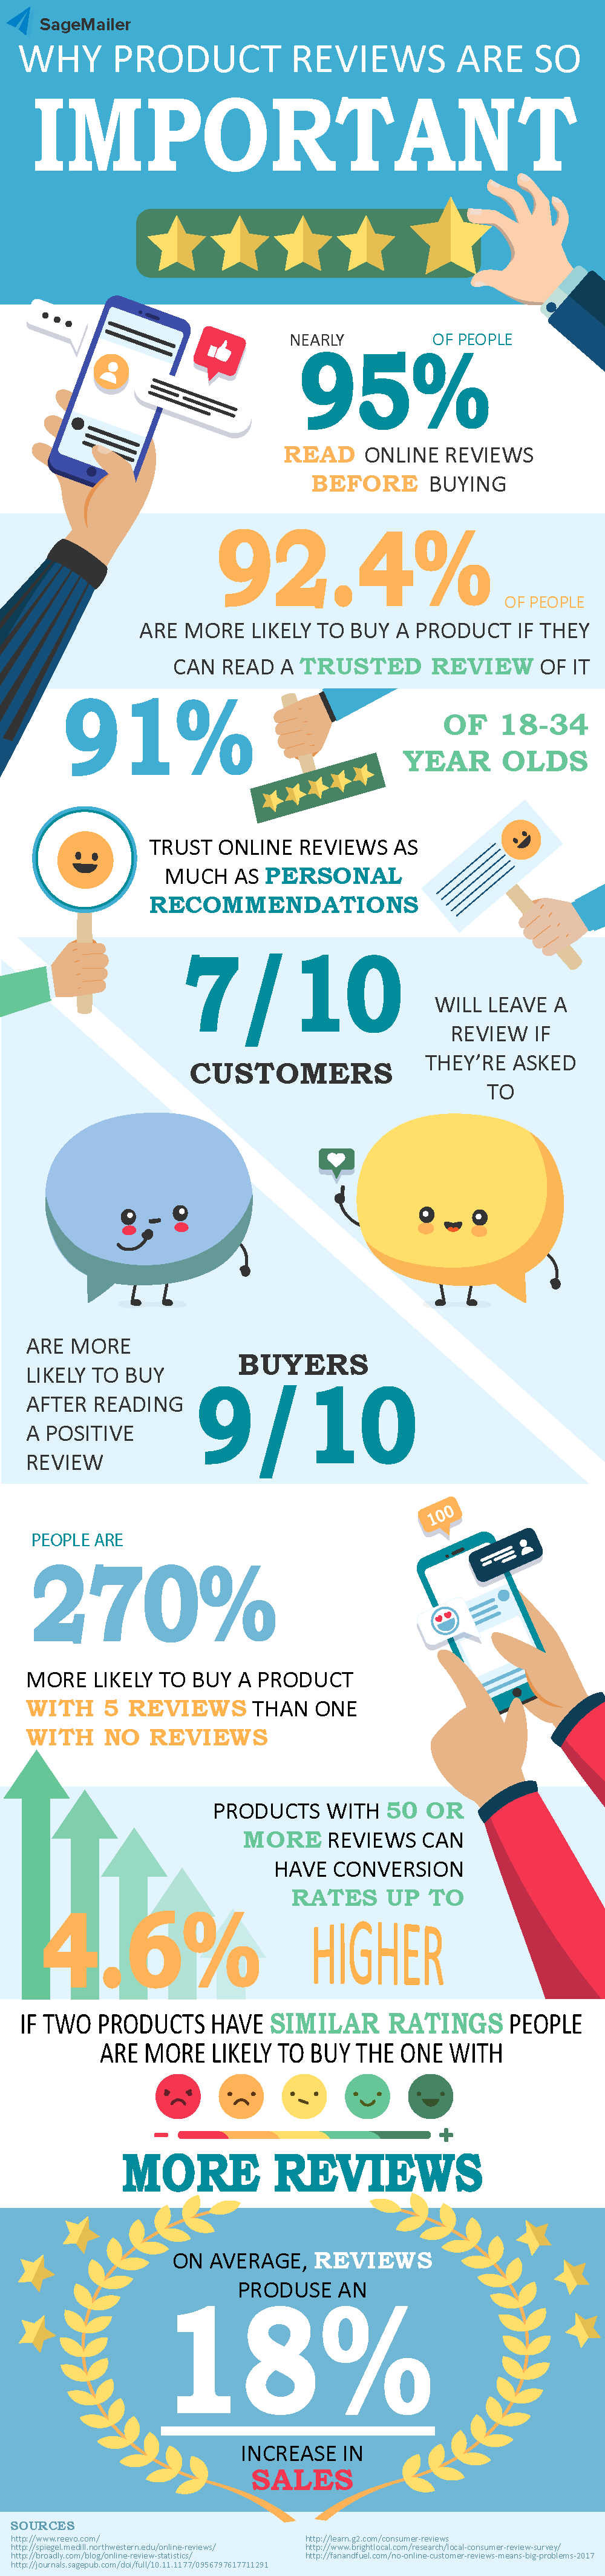 Why product reviews are important - infographic